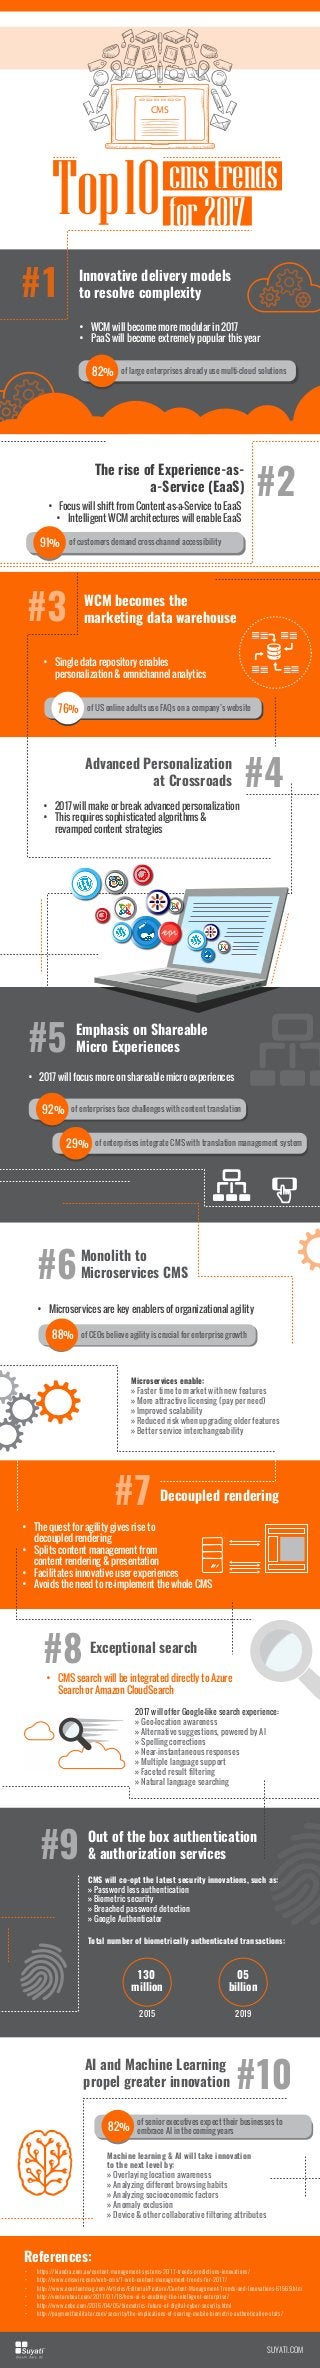 Top10cmstrends
for2017
#2
#4
#6
The rise of Experience-as-
a-Service (EaaS)
• Focus will shift from Content-as-a-Service to EaaS
• Intelligent WCM architectures will enable EaaS
Innovative delivery models
to resolve complexity
• WCM will become more modular in 2017
• PaaS will become extremely popular this year
#3 WCM becomes the
marketing data warehouse
Advanced Personalization
at Crossroads
Monolith to
Microservices CMS
#8 Exceptional search
• Single data repository enables
personalization & omnichannel analytics
• 2017 will make or break advanced personalization
• This requires sophisticated algorithms &
revamped content strategies
• Microservices are key enablers of organizational agility
Microservices enable:
» Faster time to market with new features
» More attractive licensing (pay per need)
» Improved scalability
» Reduced risk when upgrading older features
» Better service interchangeability
• CMS search will be integrated directly to Azure
Search or Amazon CloudSearch
2017 will offer Google-like search experience:
» Geo-location awareness
» Alternative suggestions, powered by AI
» Spelling corrections
» Near-instantaneous responses
» Multiple language support
» Faceted result filtering
» Natural language searching
#1
#5 Emphasis on Shareable
Micro Experiences
#7 Decoupled rendering
• 2017 will focus more on shareable micro experiences
• The quest for agility gives rise to
decoupled rendering
• Splits content management from
content rendering & presentation
• Facilitates innovative user experiences
• Avoids the need to re-implement the whole CMS
• https://kiandra.com.au/content-management-systems-2017-trends-predictions-innovations/
• http://www.cmswire.com/web-cms/7-web-content-management-trends-for-2017/
• http://www.econtentmag.com/Articles/Editorial/Feature/Content-Management-Trends-and-Innovations-61569.htm
• http://venturebeat.com/2017/01/18/how-ai-is-enabling-the-intelligent-enterprise/
• http://www.cnbc.com/2016/04/05/biometrics-future-of-digital-cyber-security.html
• http://paymentfacilitator.com/security/the-implications-of-soaring-mobile-biometric-authentication-stats/
#9 Out of the box authentication
& authorization services
CMS will co-opt the latest security innovations, such as:
» Password less authentication
» Biometric security
» Breached password detection
» Google Authenticator
Machine learning & AI will take innovation
to the next level by:
» Overlaying location awareness
» Analyzing different browsing habits
» Analyzing socioeconomic factors
» Anomaly exclusion
» Device & other collaborative filtering attributes
Total number of biometrically authenticated transactions:
2015
130
million
2019
05
billion
#10
AI and Machine Learning
propel greater innovation
References:
SUYATI.COM
of large enterprises already use multi-cloud solutions82%
of customers demand cross-channel accessibility91%
of CEOs believe agility is crucial for enterprise growth88%
of US online adults use FAQs on a company’s website76%
of enterprises face challenges with content translation92%
of enterprises integrate CMS with translation management system29%
of senior executives expect their businesses to
embrace AI in the coming years82%
CMS
 